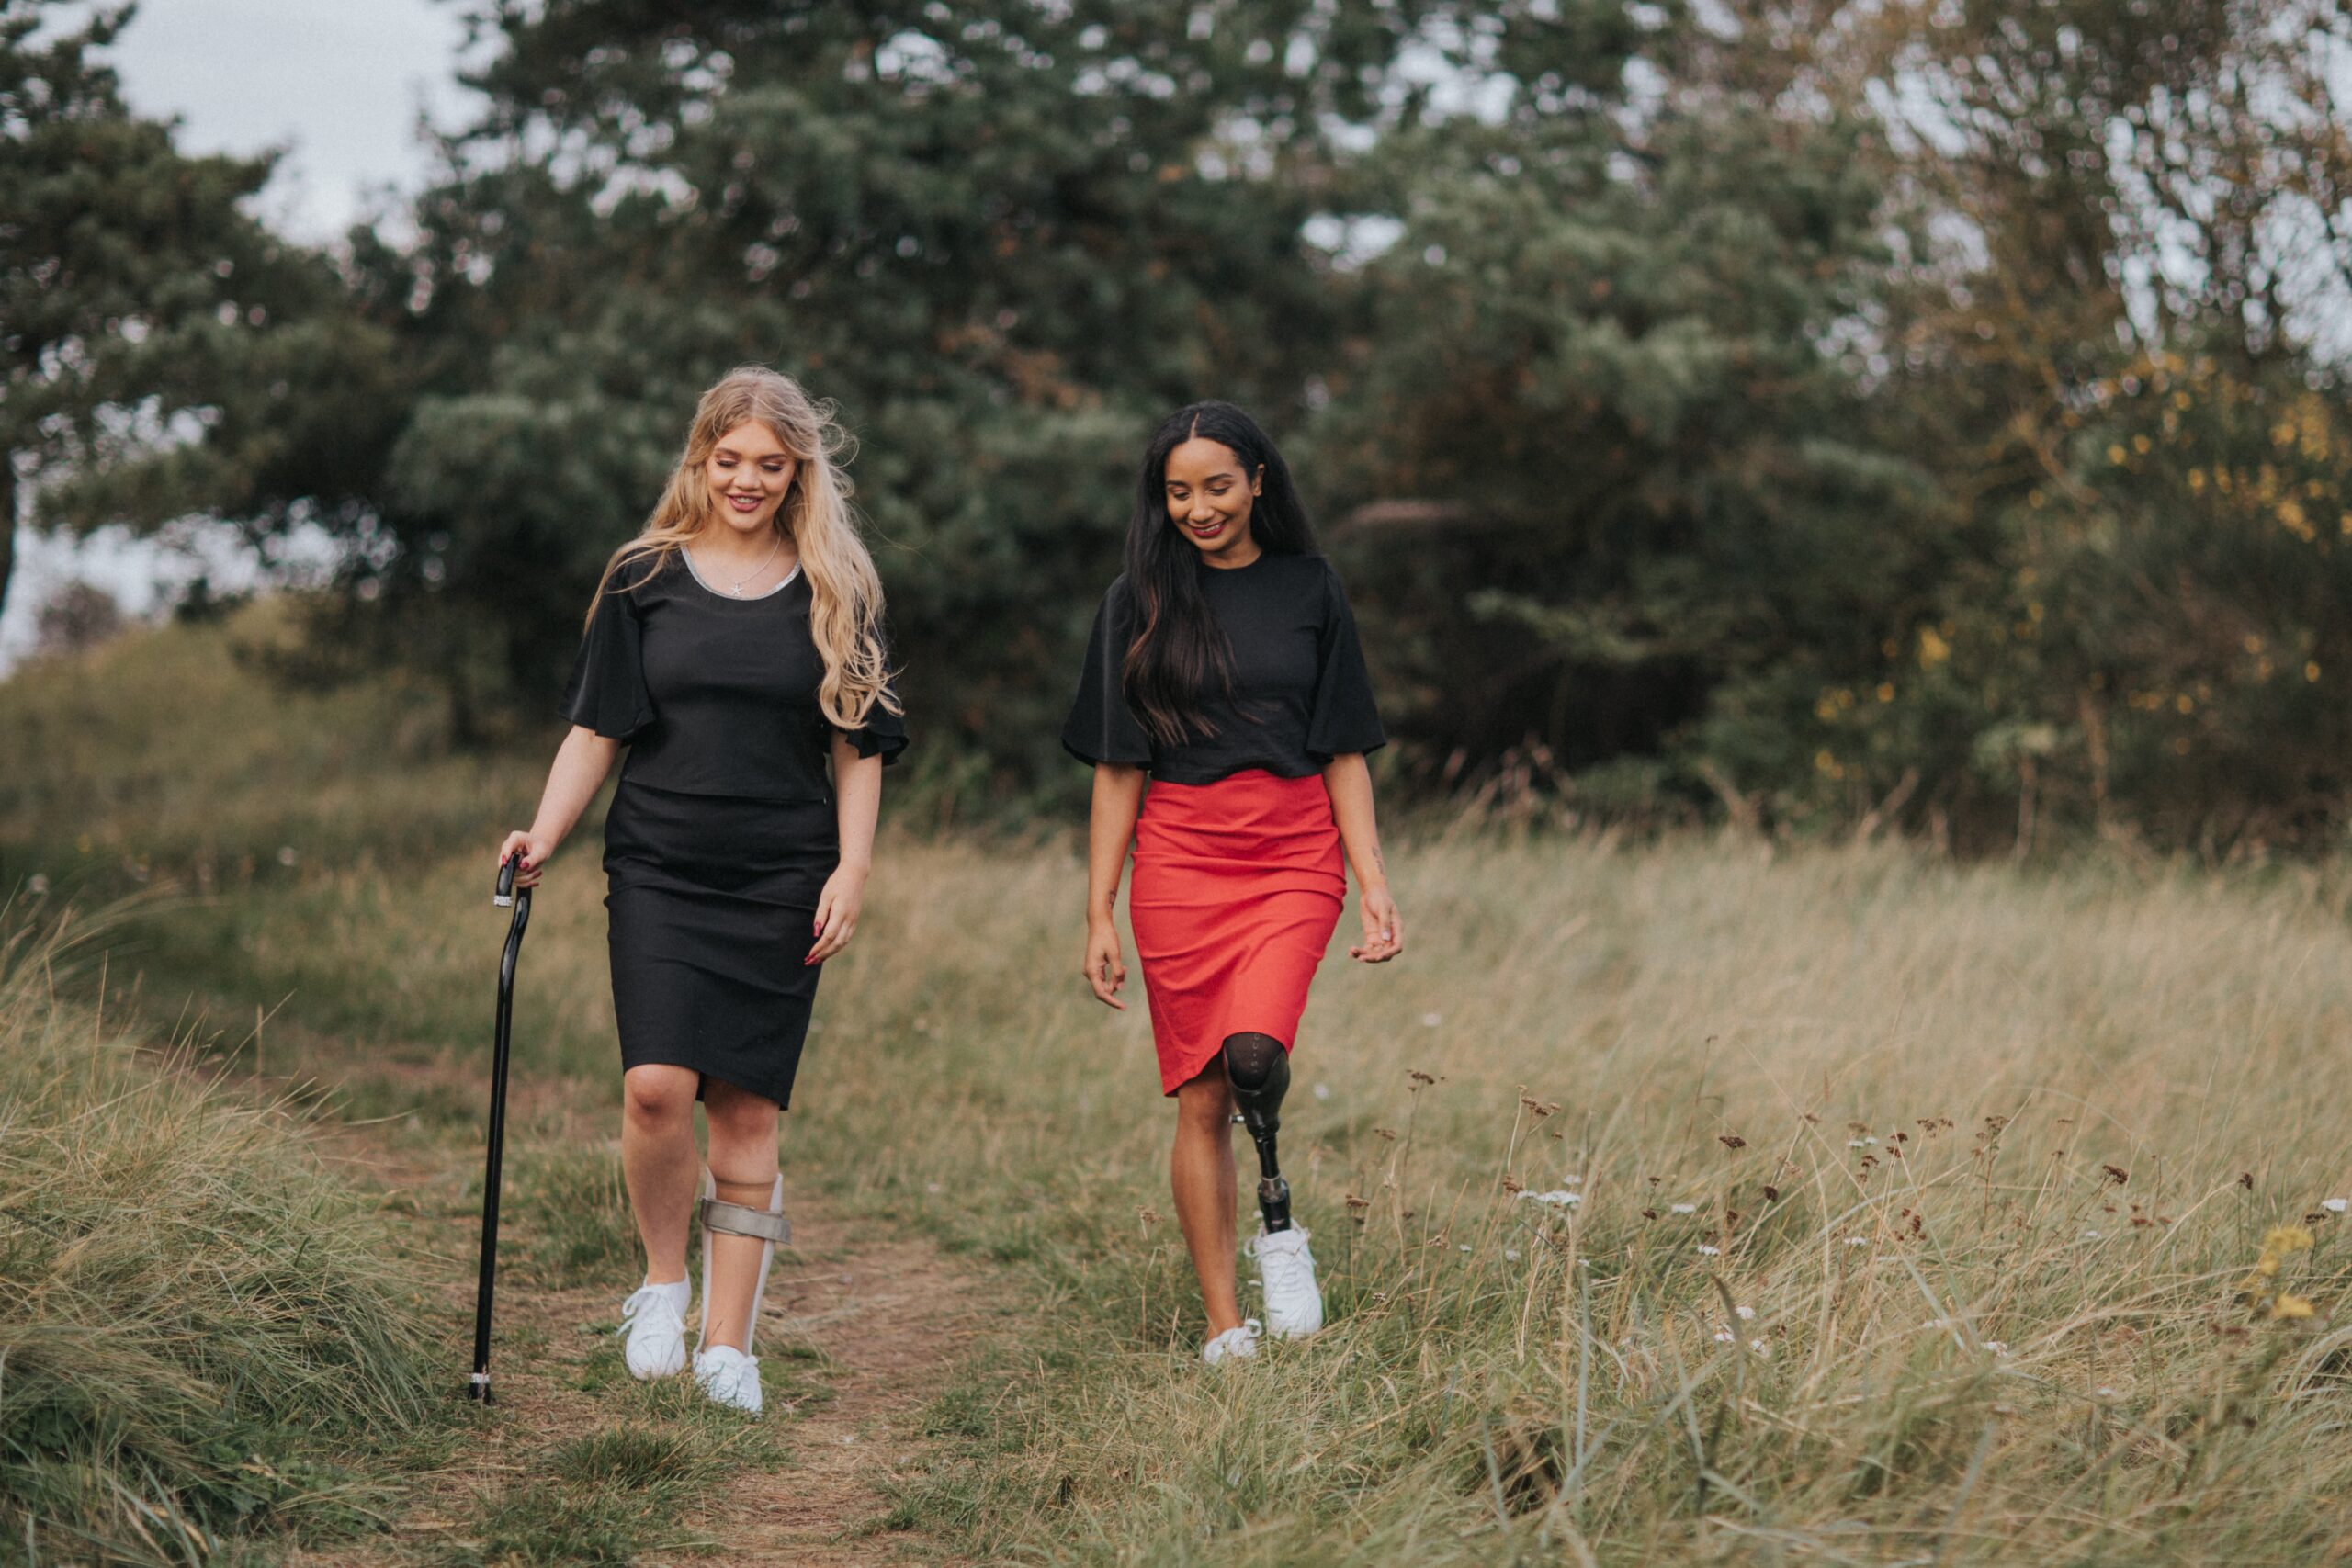 Fashion styling and disability inclusion – how Kintsugi is spearheading the accessible clothing movement